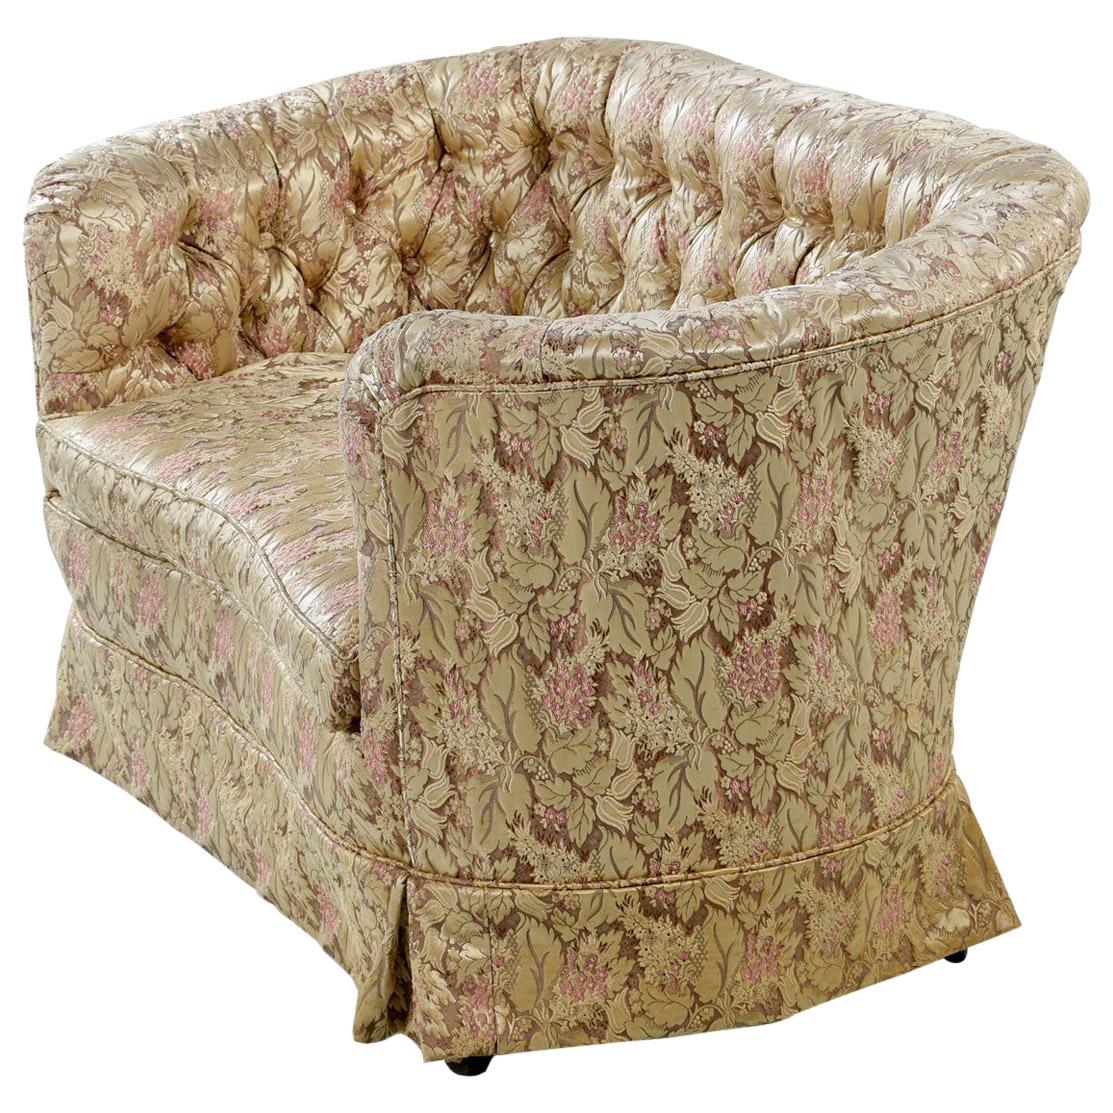 Tufted Antique Victorian Bohemian Rose Gold and Beige Floral Settee